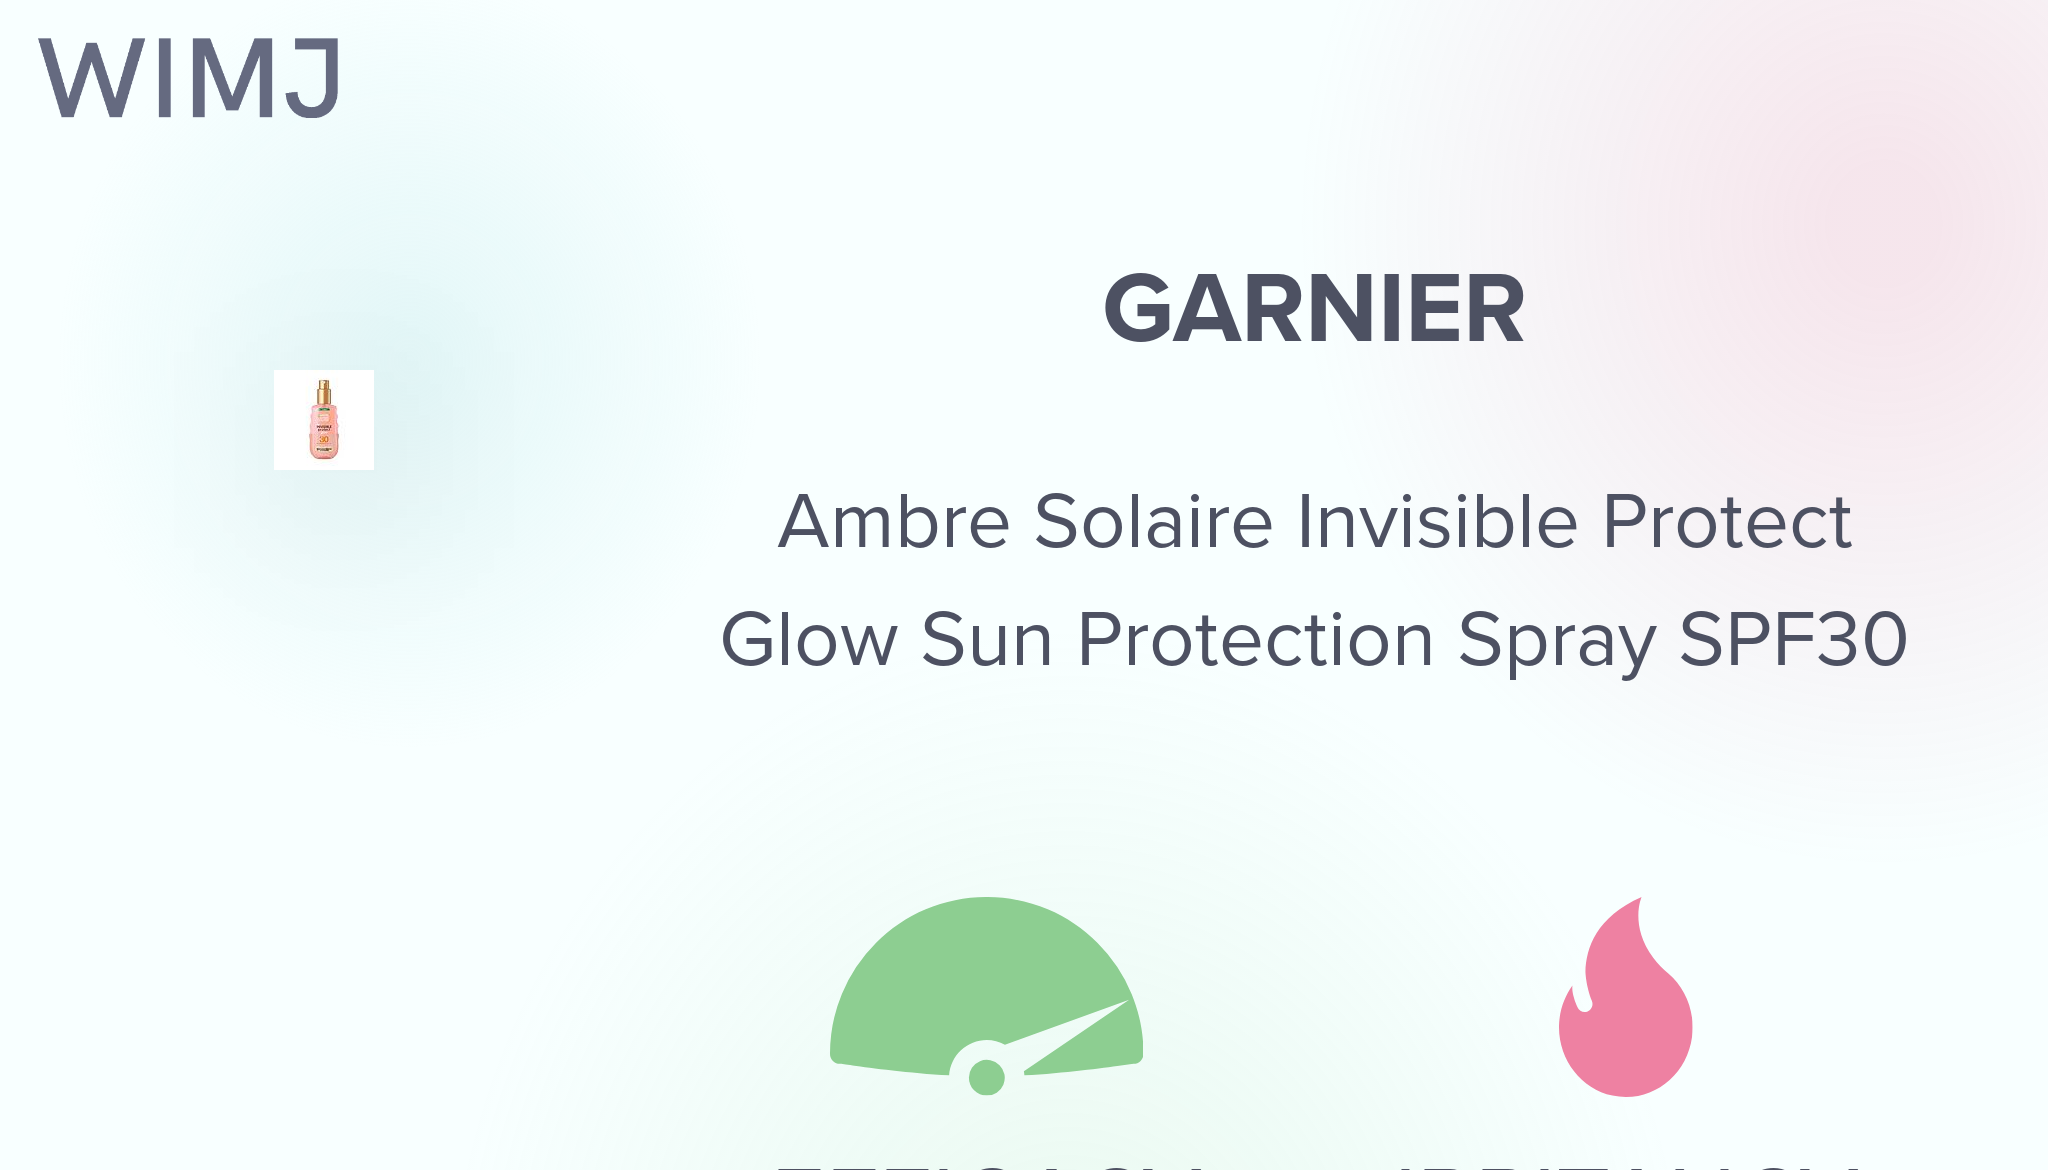 Review: Garnier - Ambre Solaire Invisible Protect Glow Sun Protection Spray  SPF30 - WIMJ